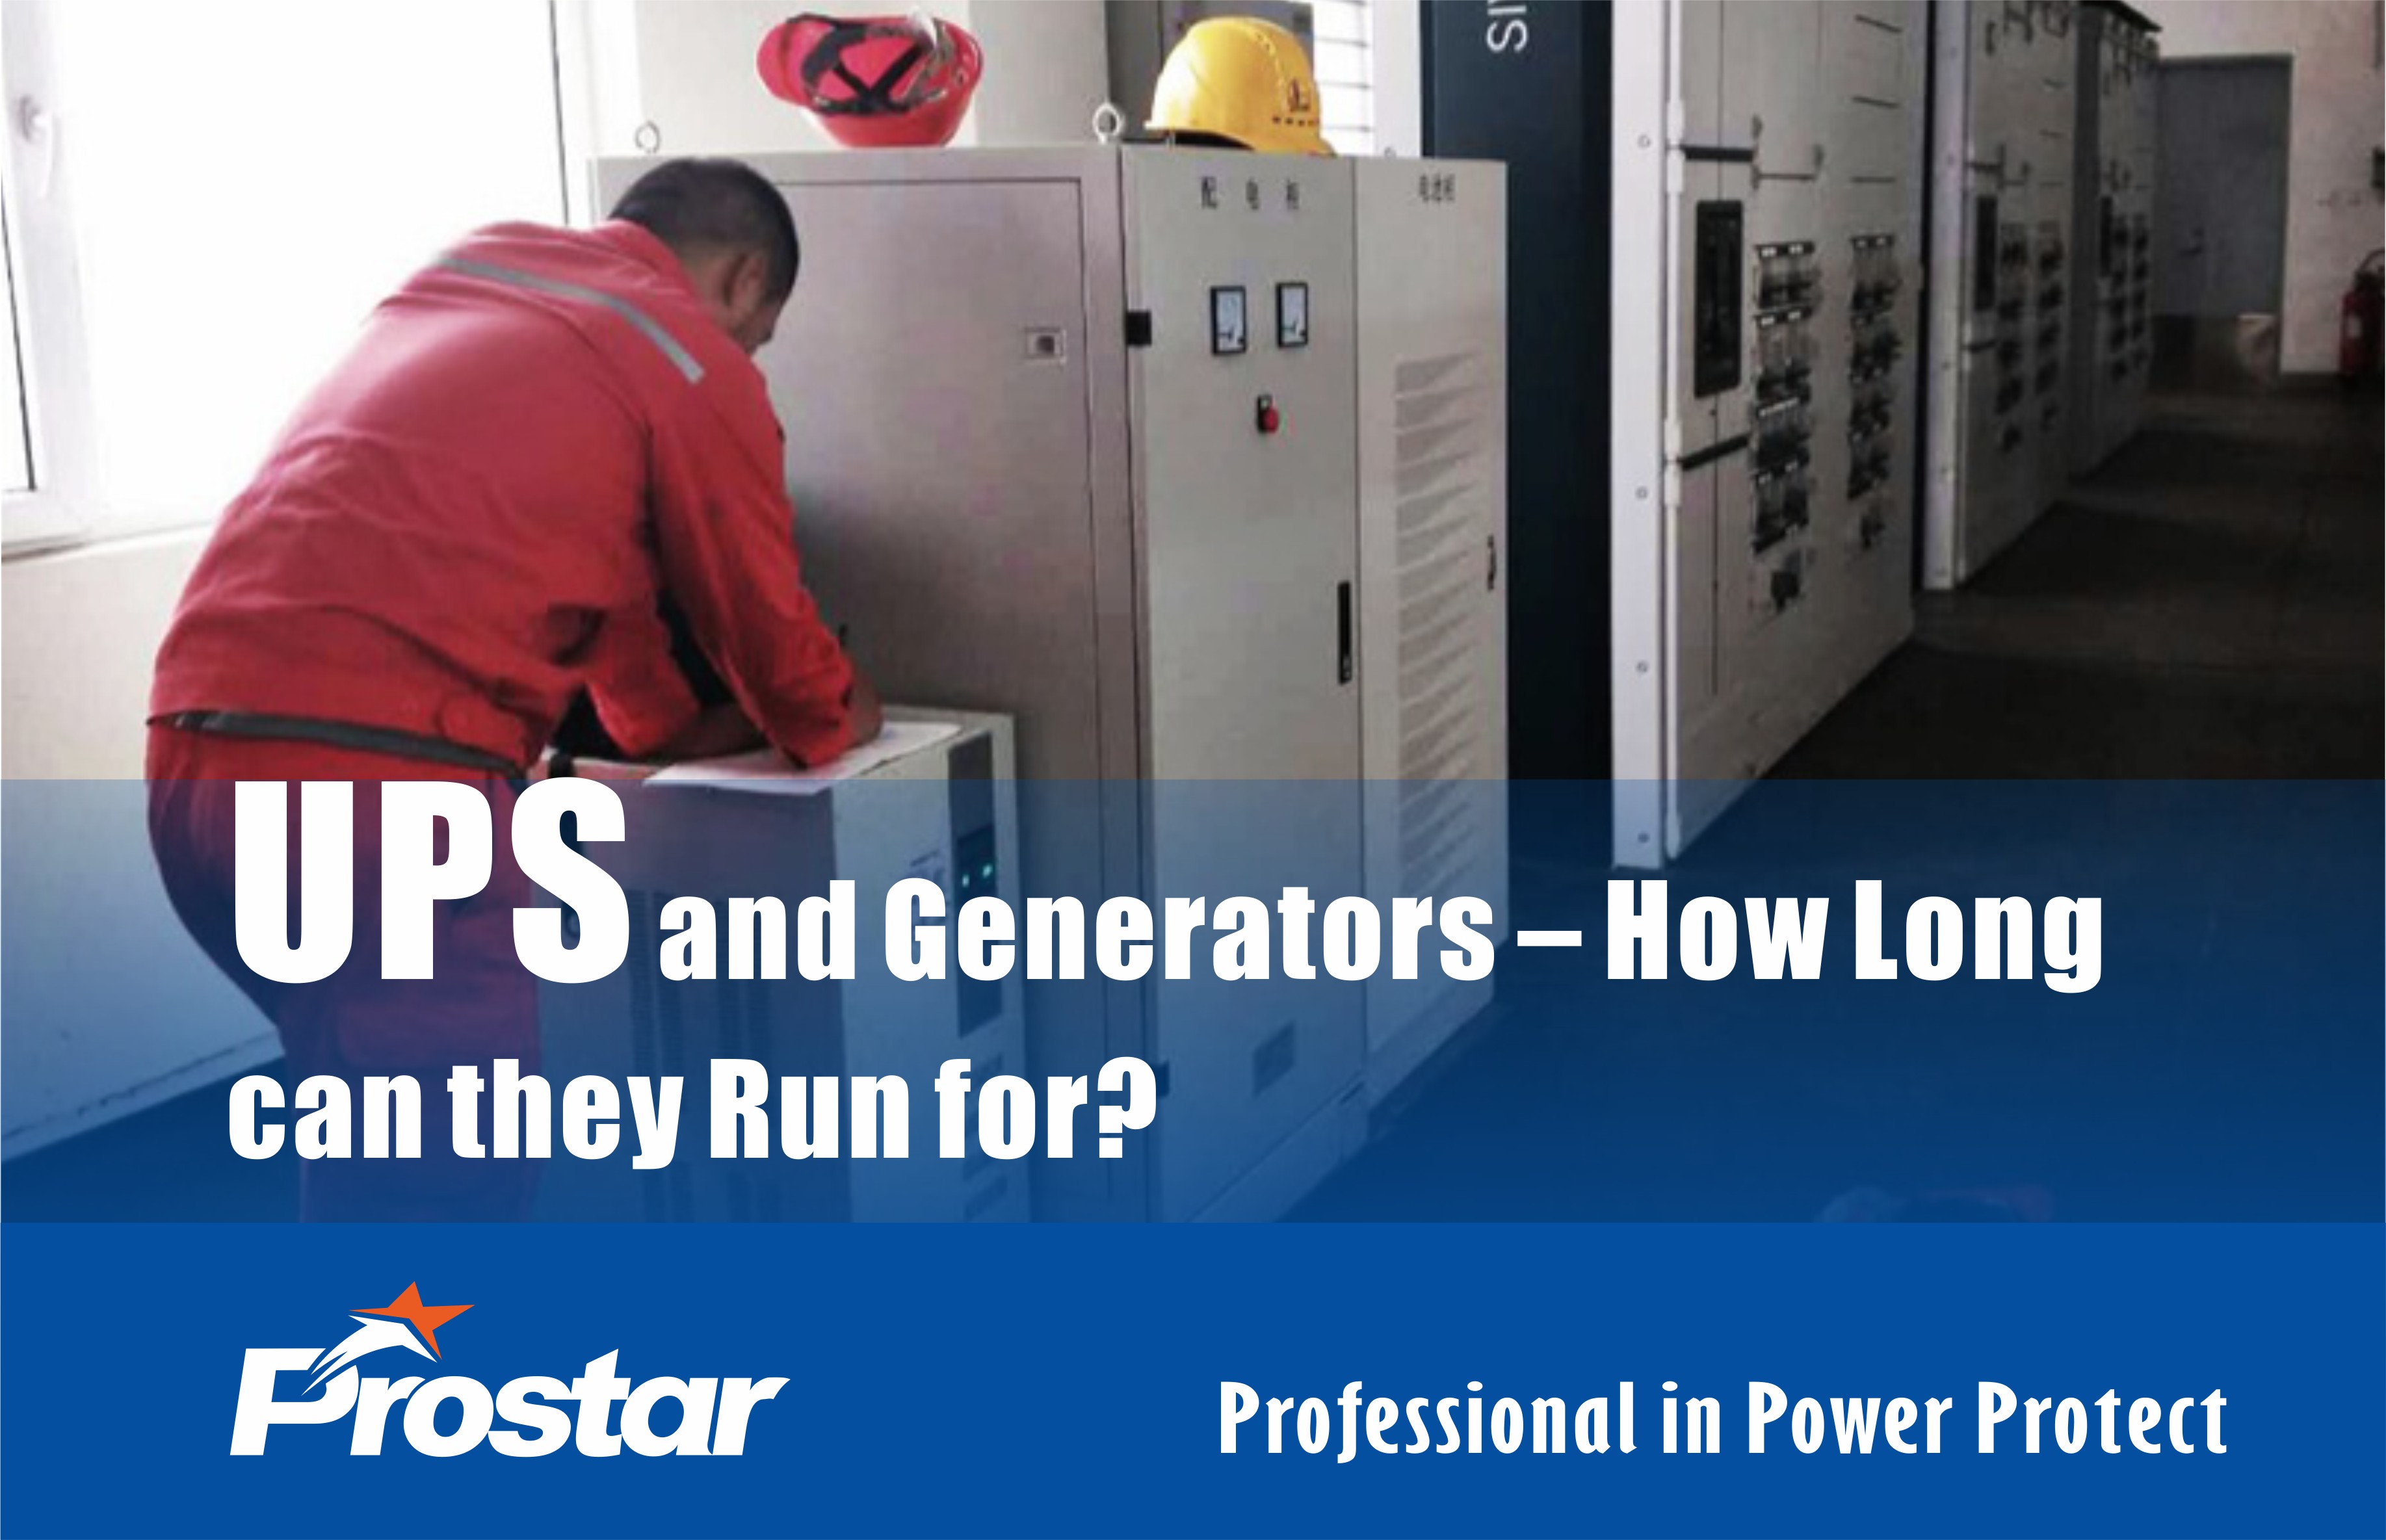 UPS and Generators – How Long can they Run for?